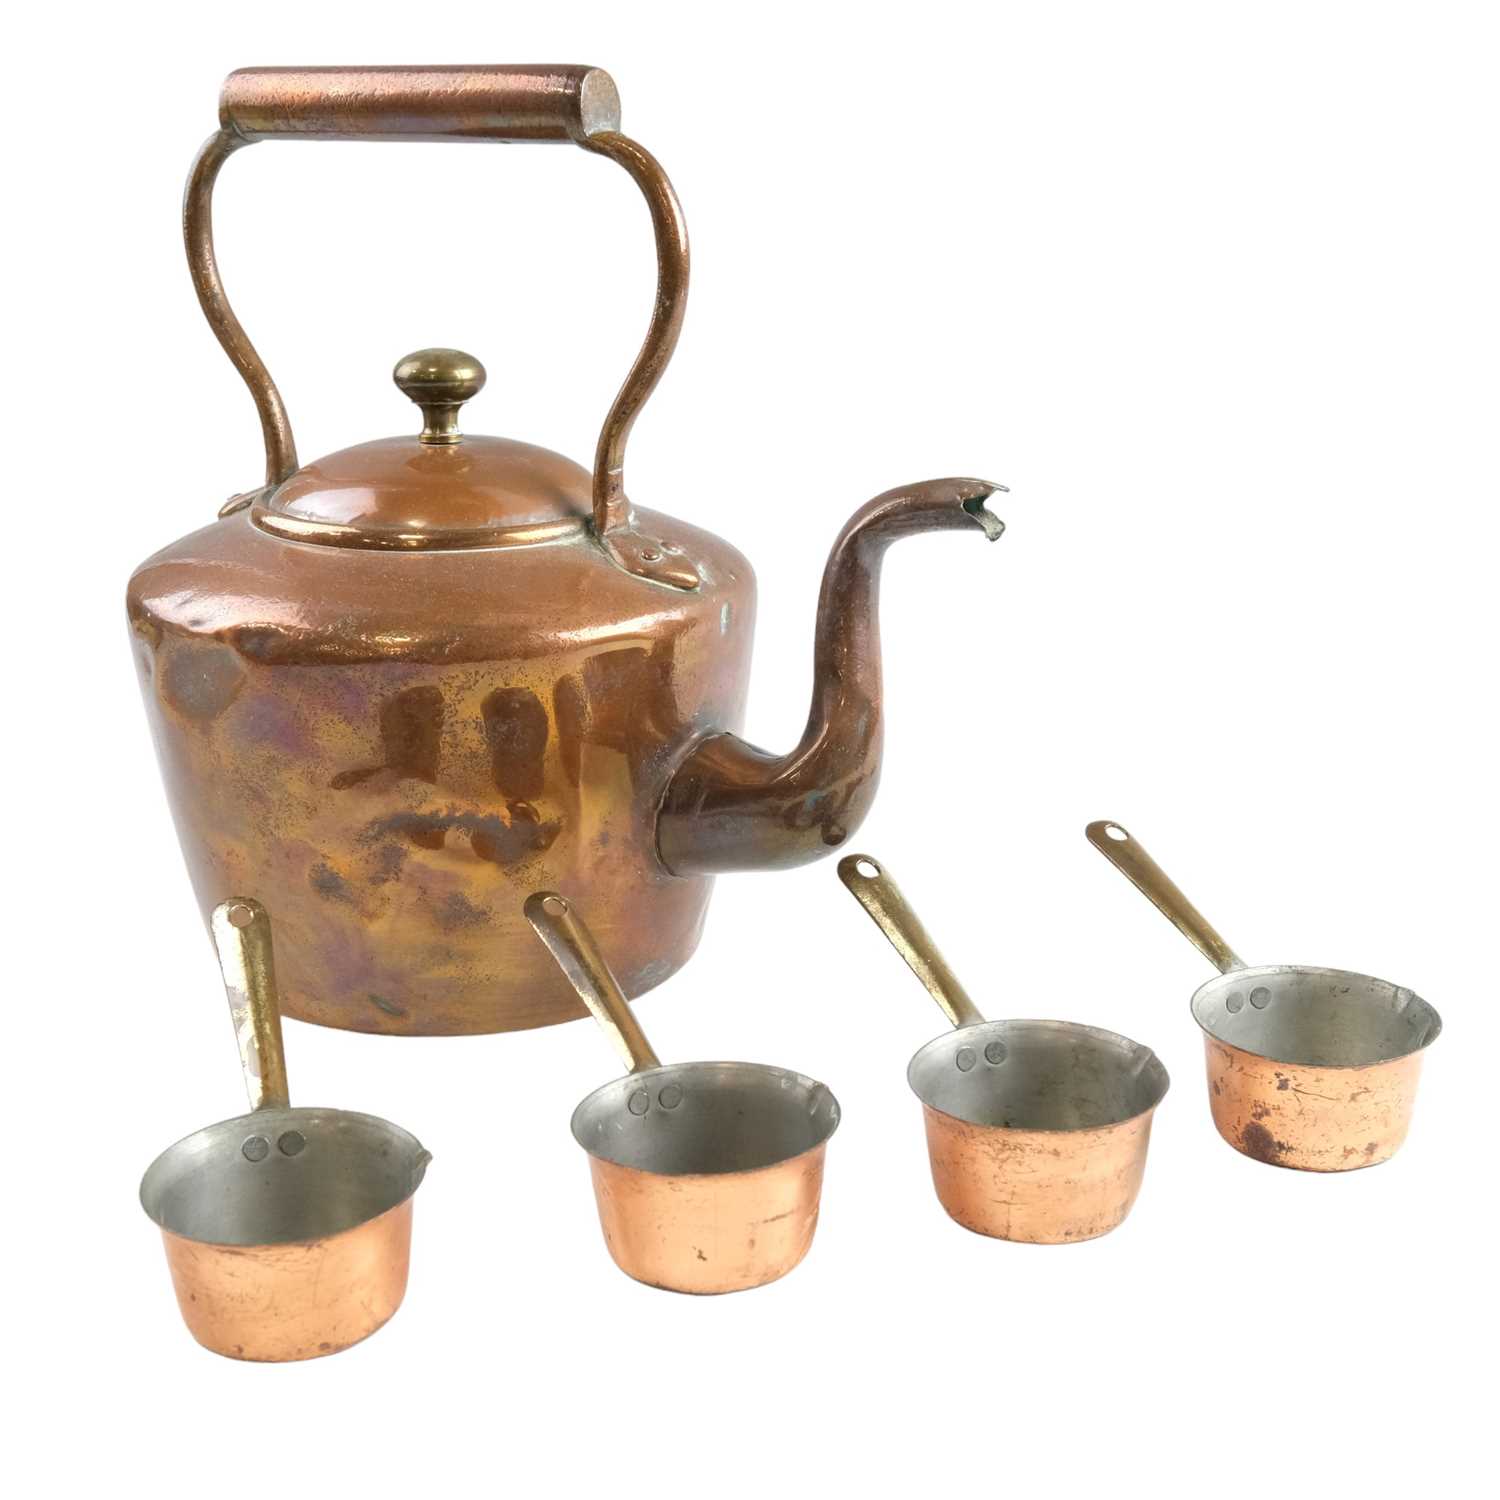 A Victorian copper kettle and four copper and brass diminutive 2-ounce saucepans, kettle 26 cm